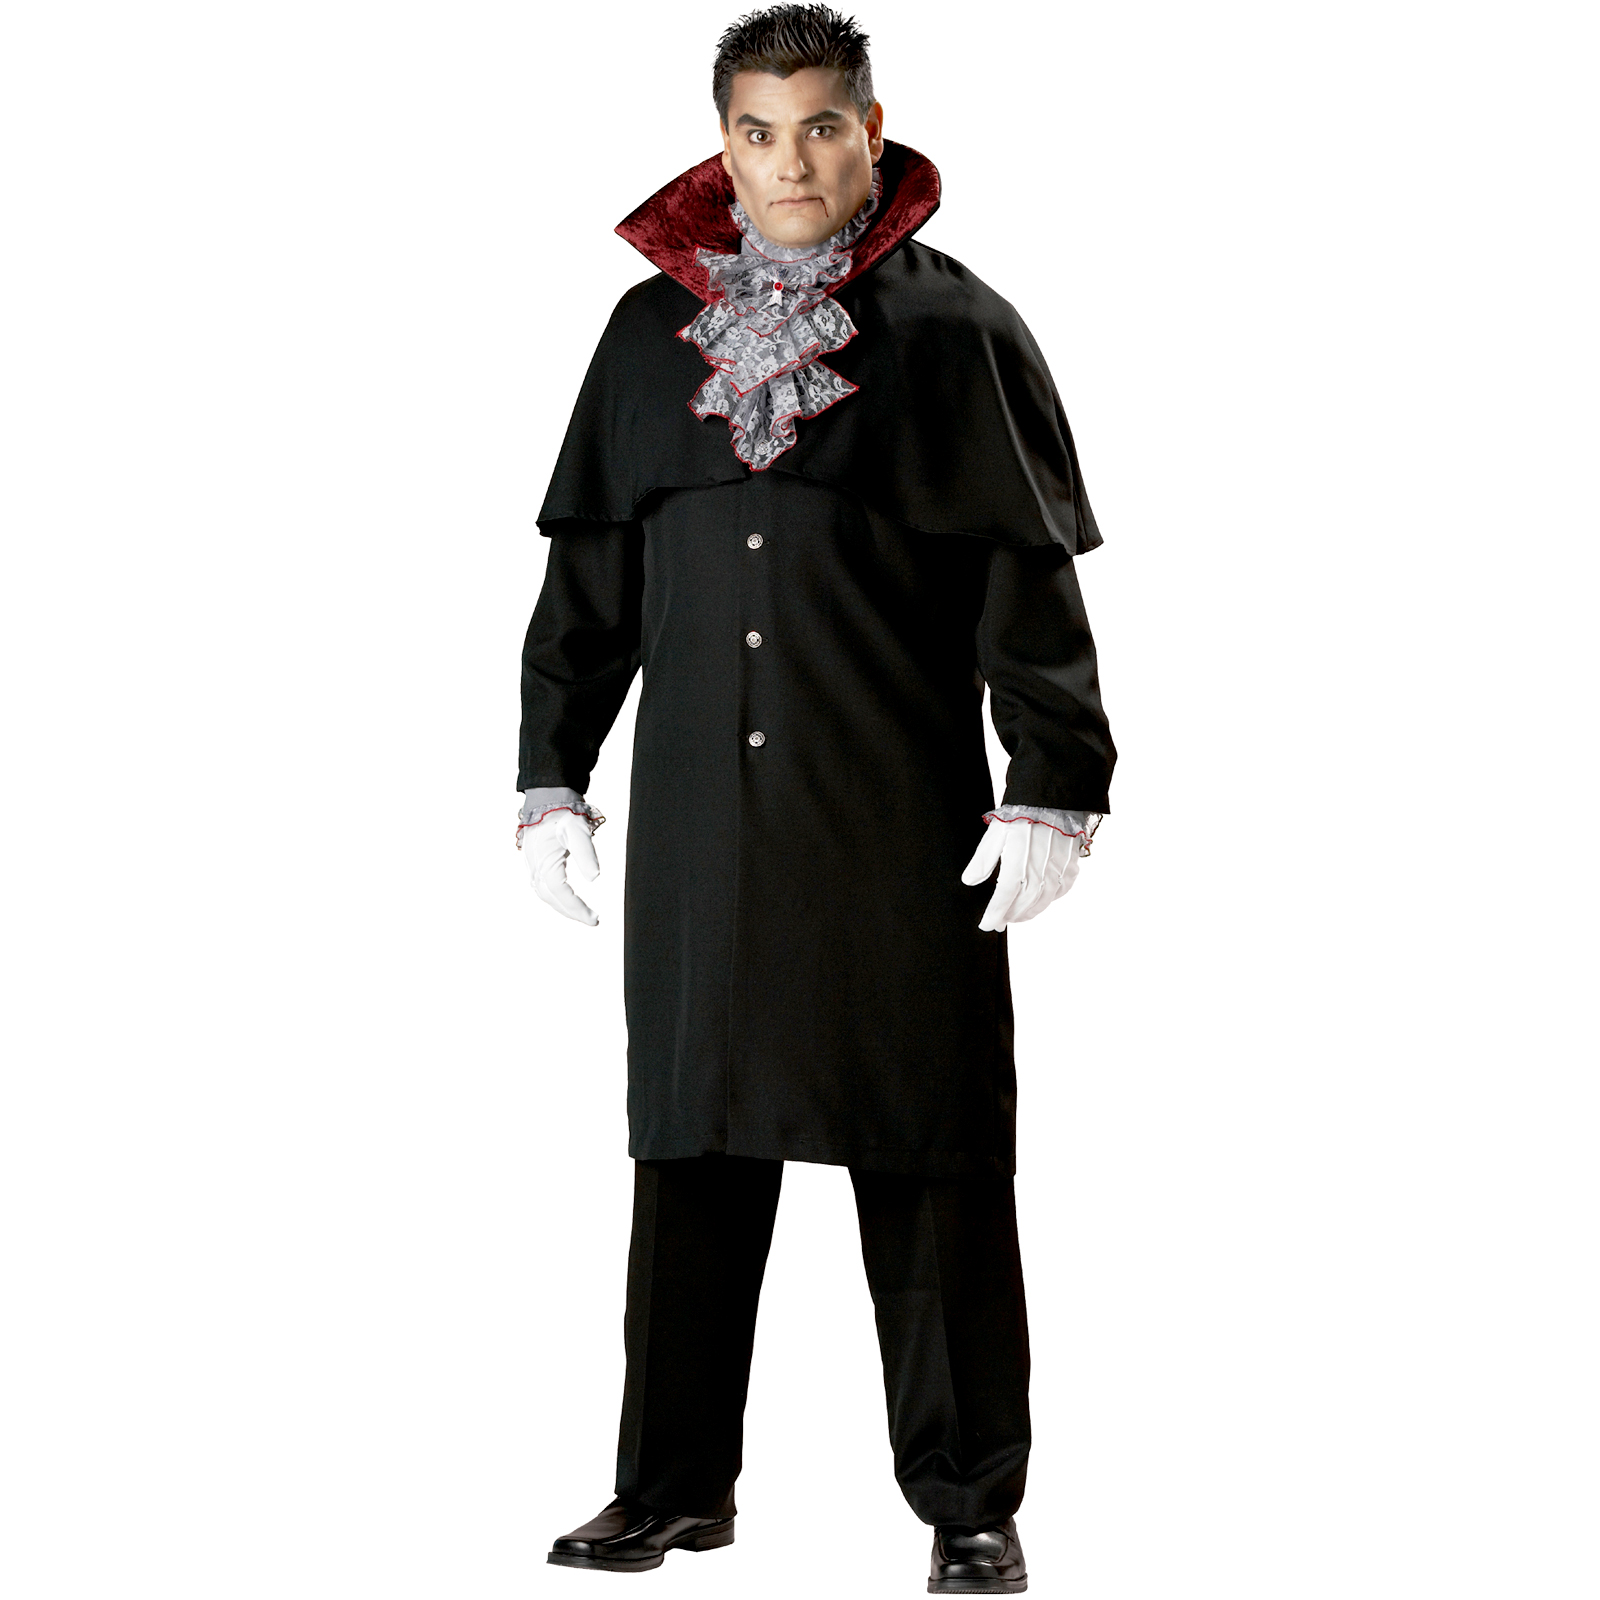 In Character Costumes Men's Edwardian Vampire Plus Elite Collection Adult - XX-Large